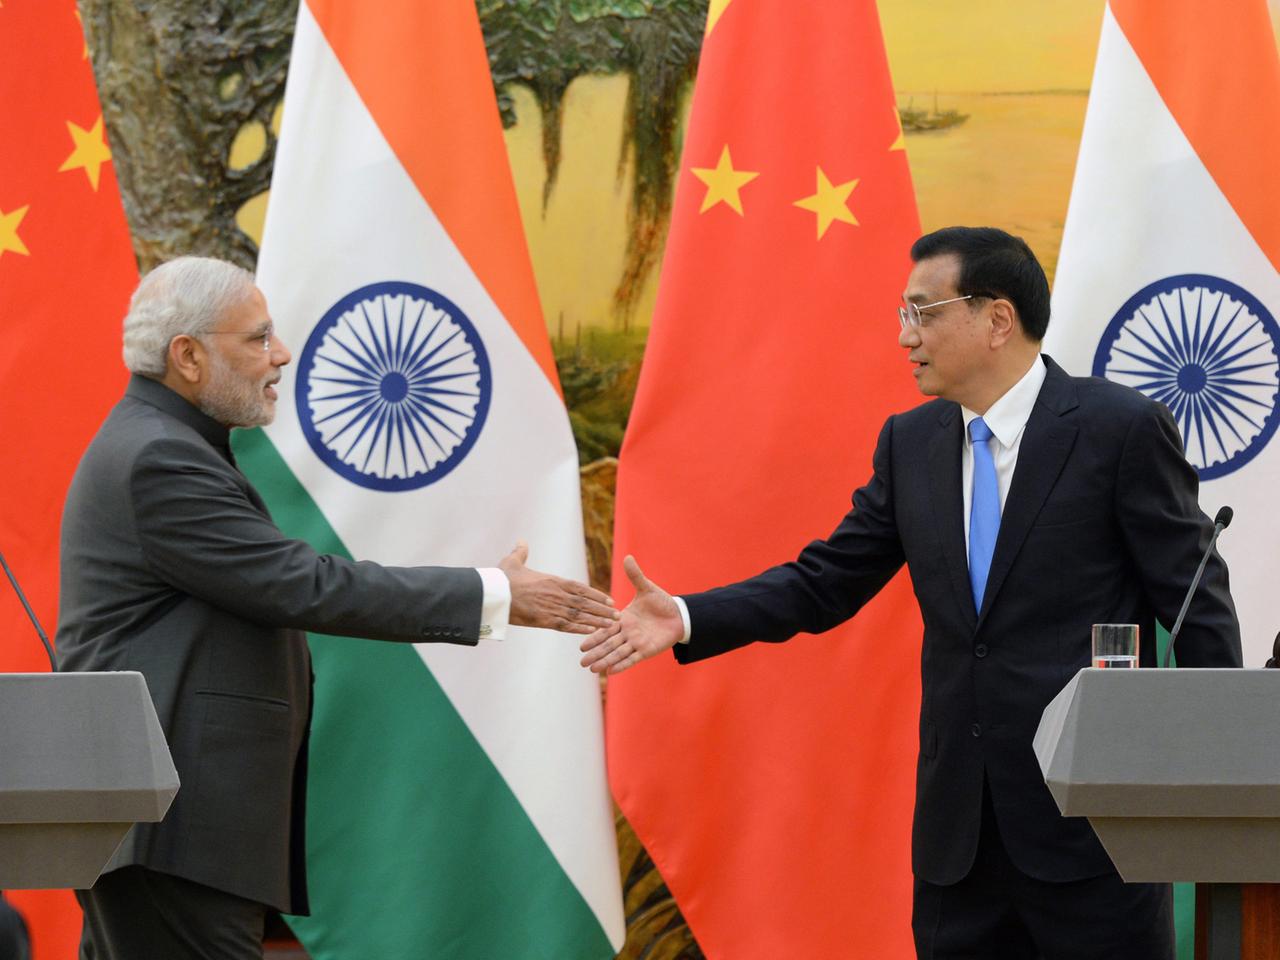 Indian Prime Minister Narendra Modi (L) shakes hands with Chinese Premier Li Keqiang (R) during a news conference at the Great Hall of the People in Beijing, China, 15 May 2015. The Indian leader is on an official visit, and is expected to meet with Chinese top officials to boost bilateral relations in economic and political matters.